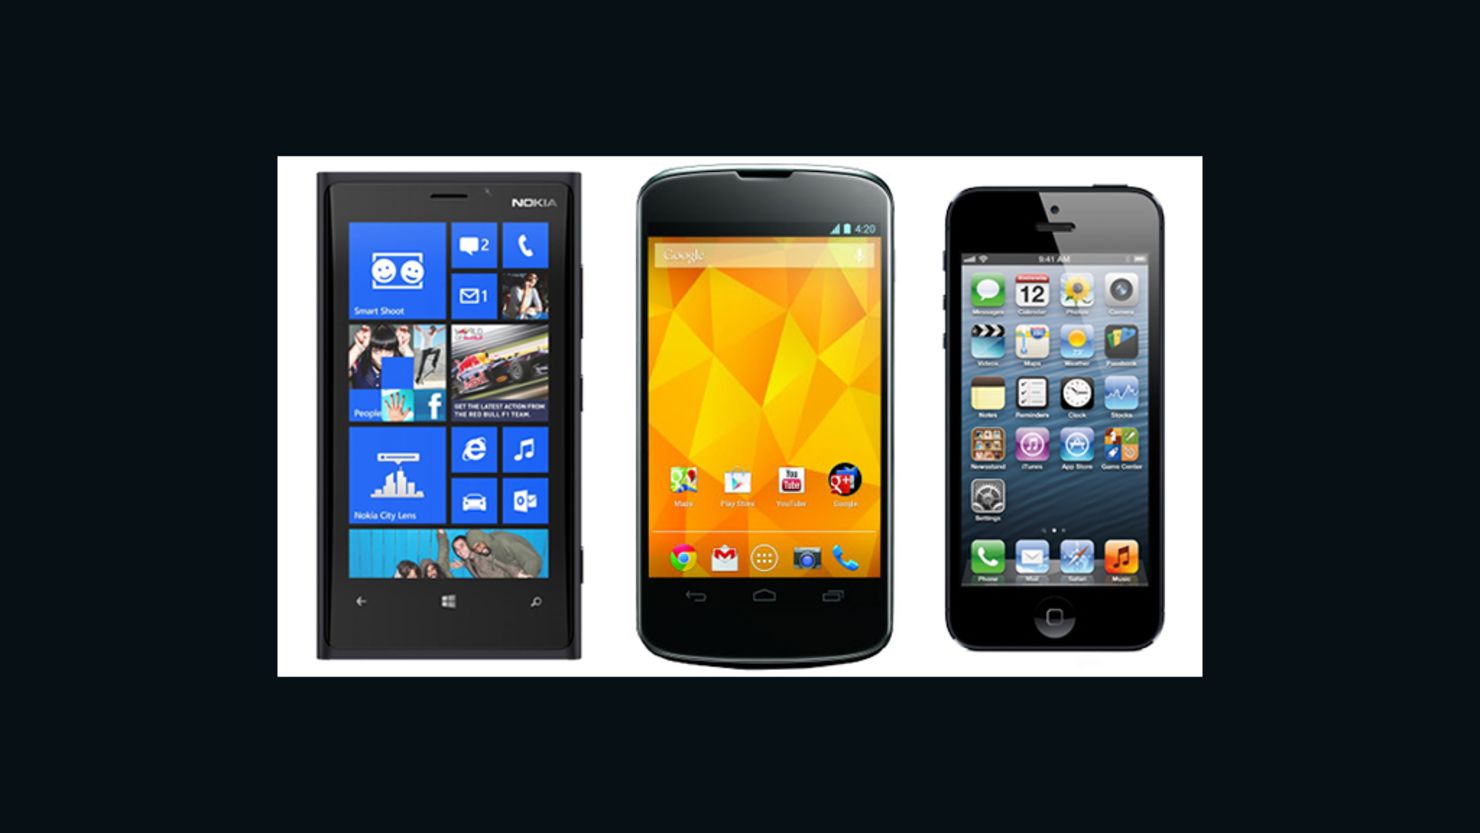 Windows Phone 8 on a Nokia 920, Android 4.2 on the Nexus 4, and an iPhone 5 running iOS 6. 